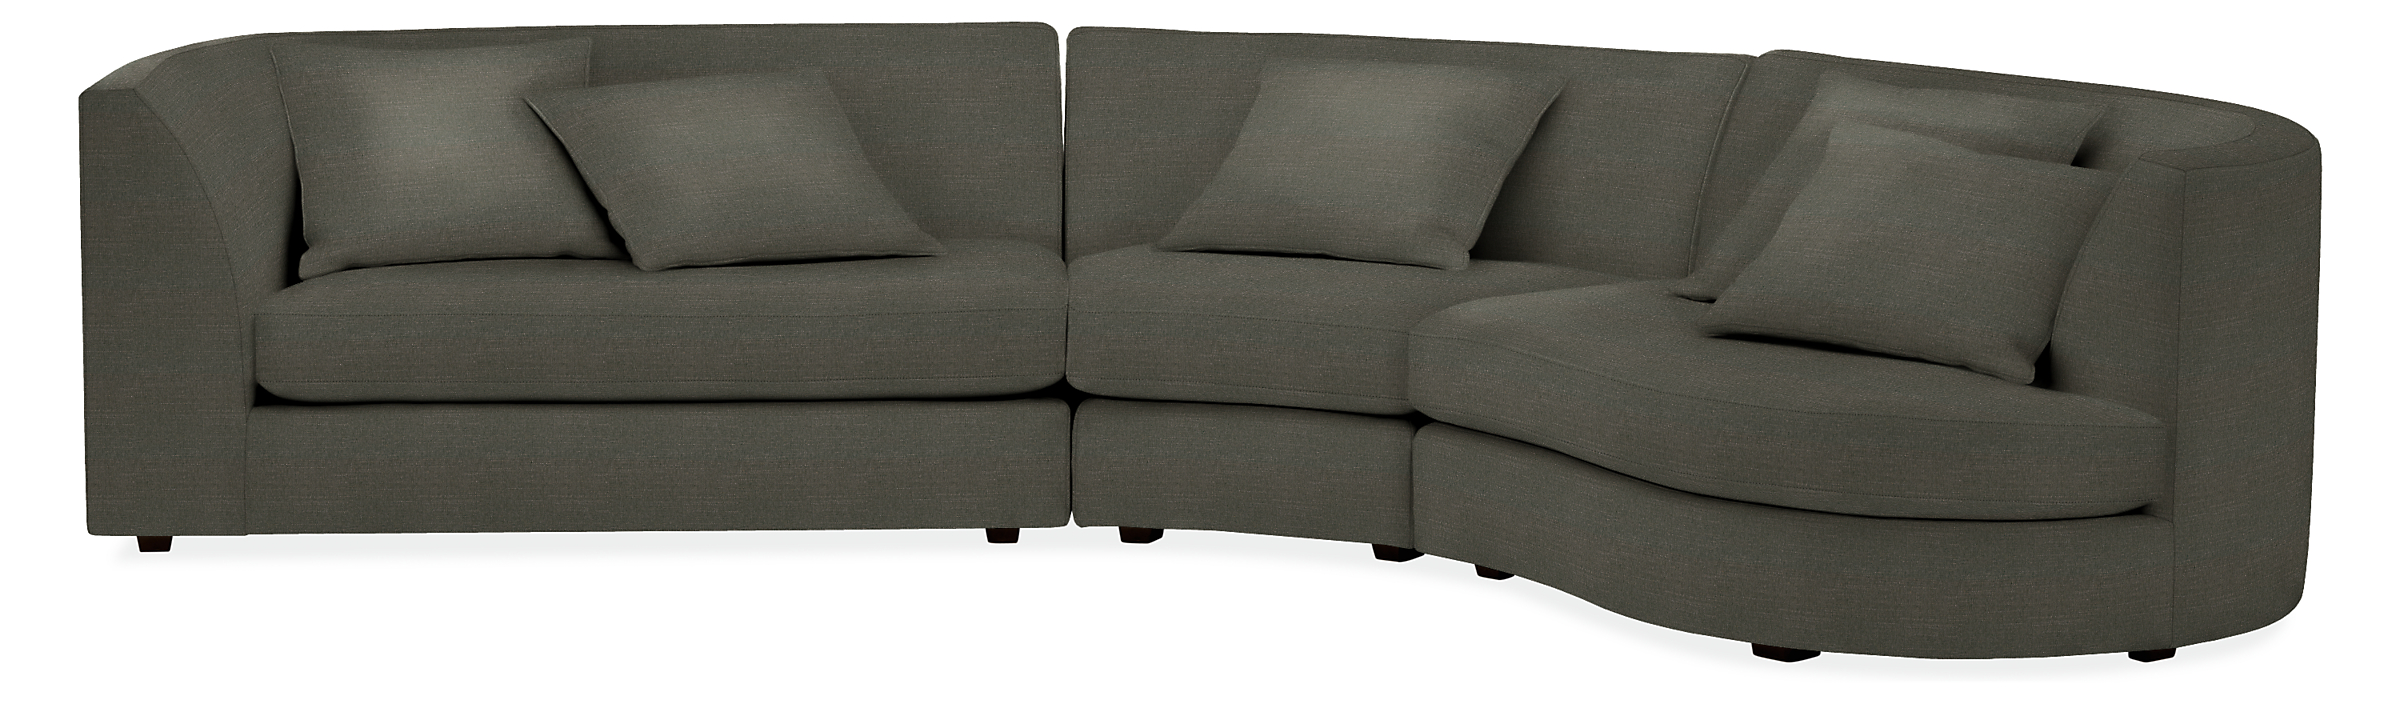 Astaire 132x77" Three-Piece Sectional Sofa with Left-Arm Sofa